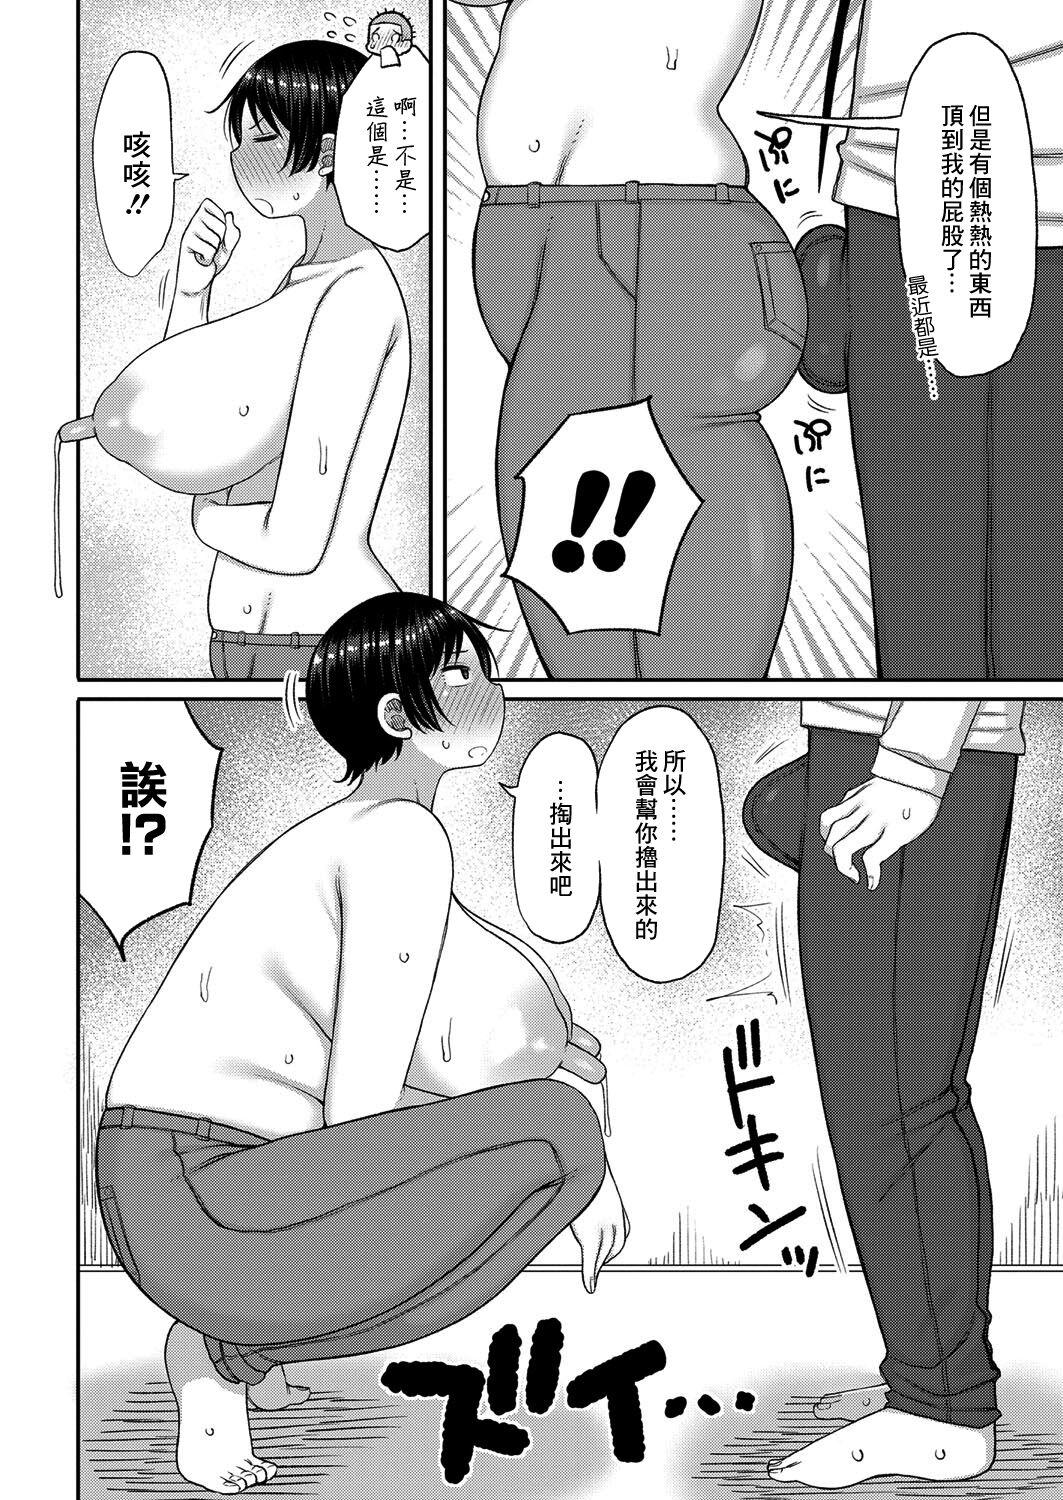 Babes 母さんの乳を榨る日々 Tan - Page 6